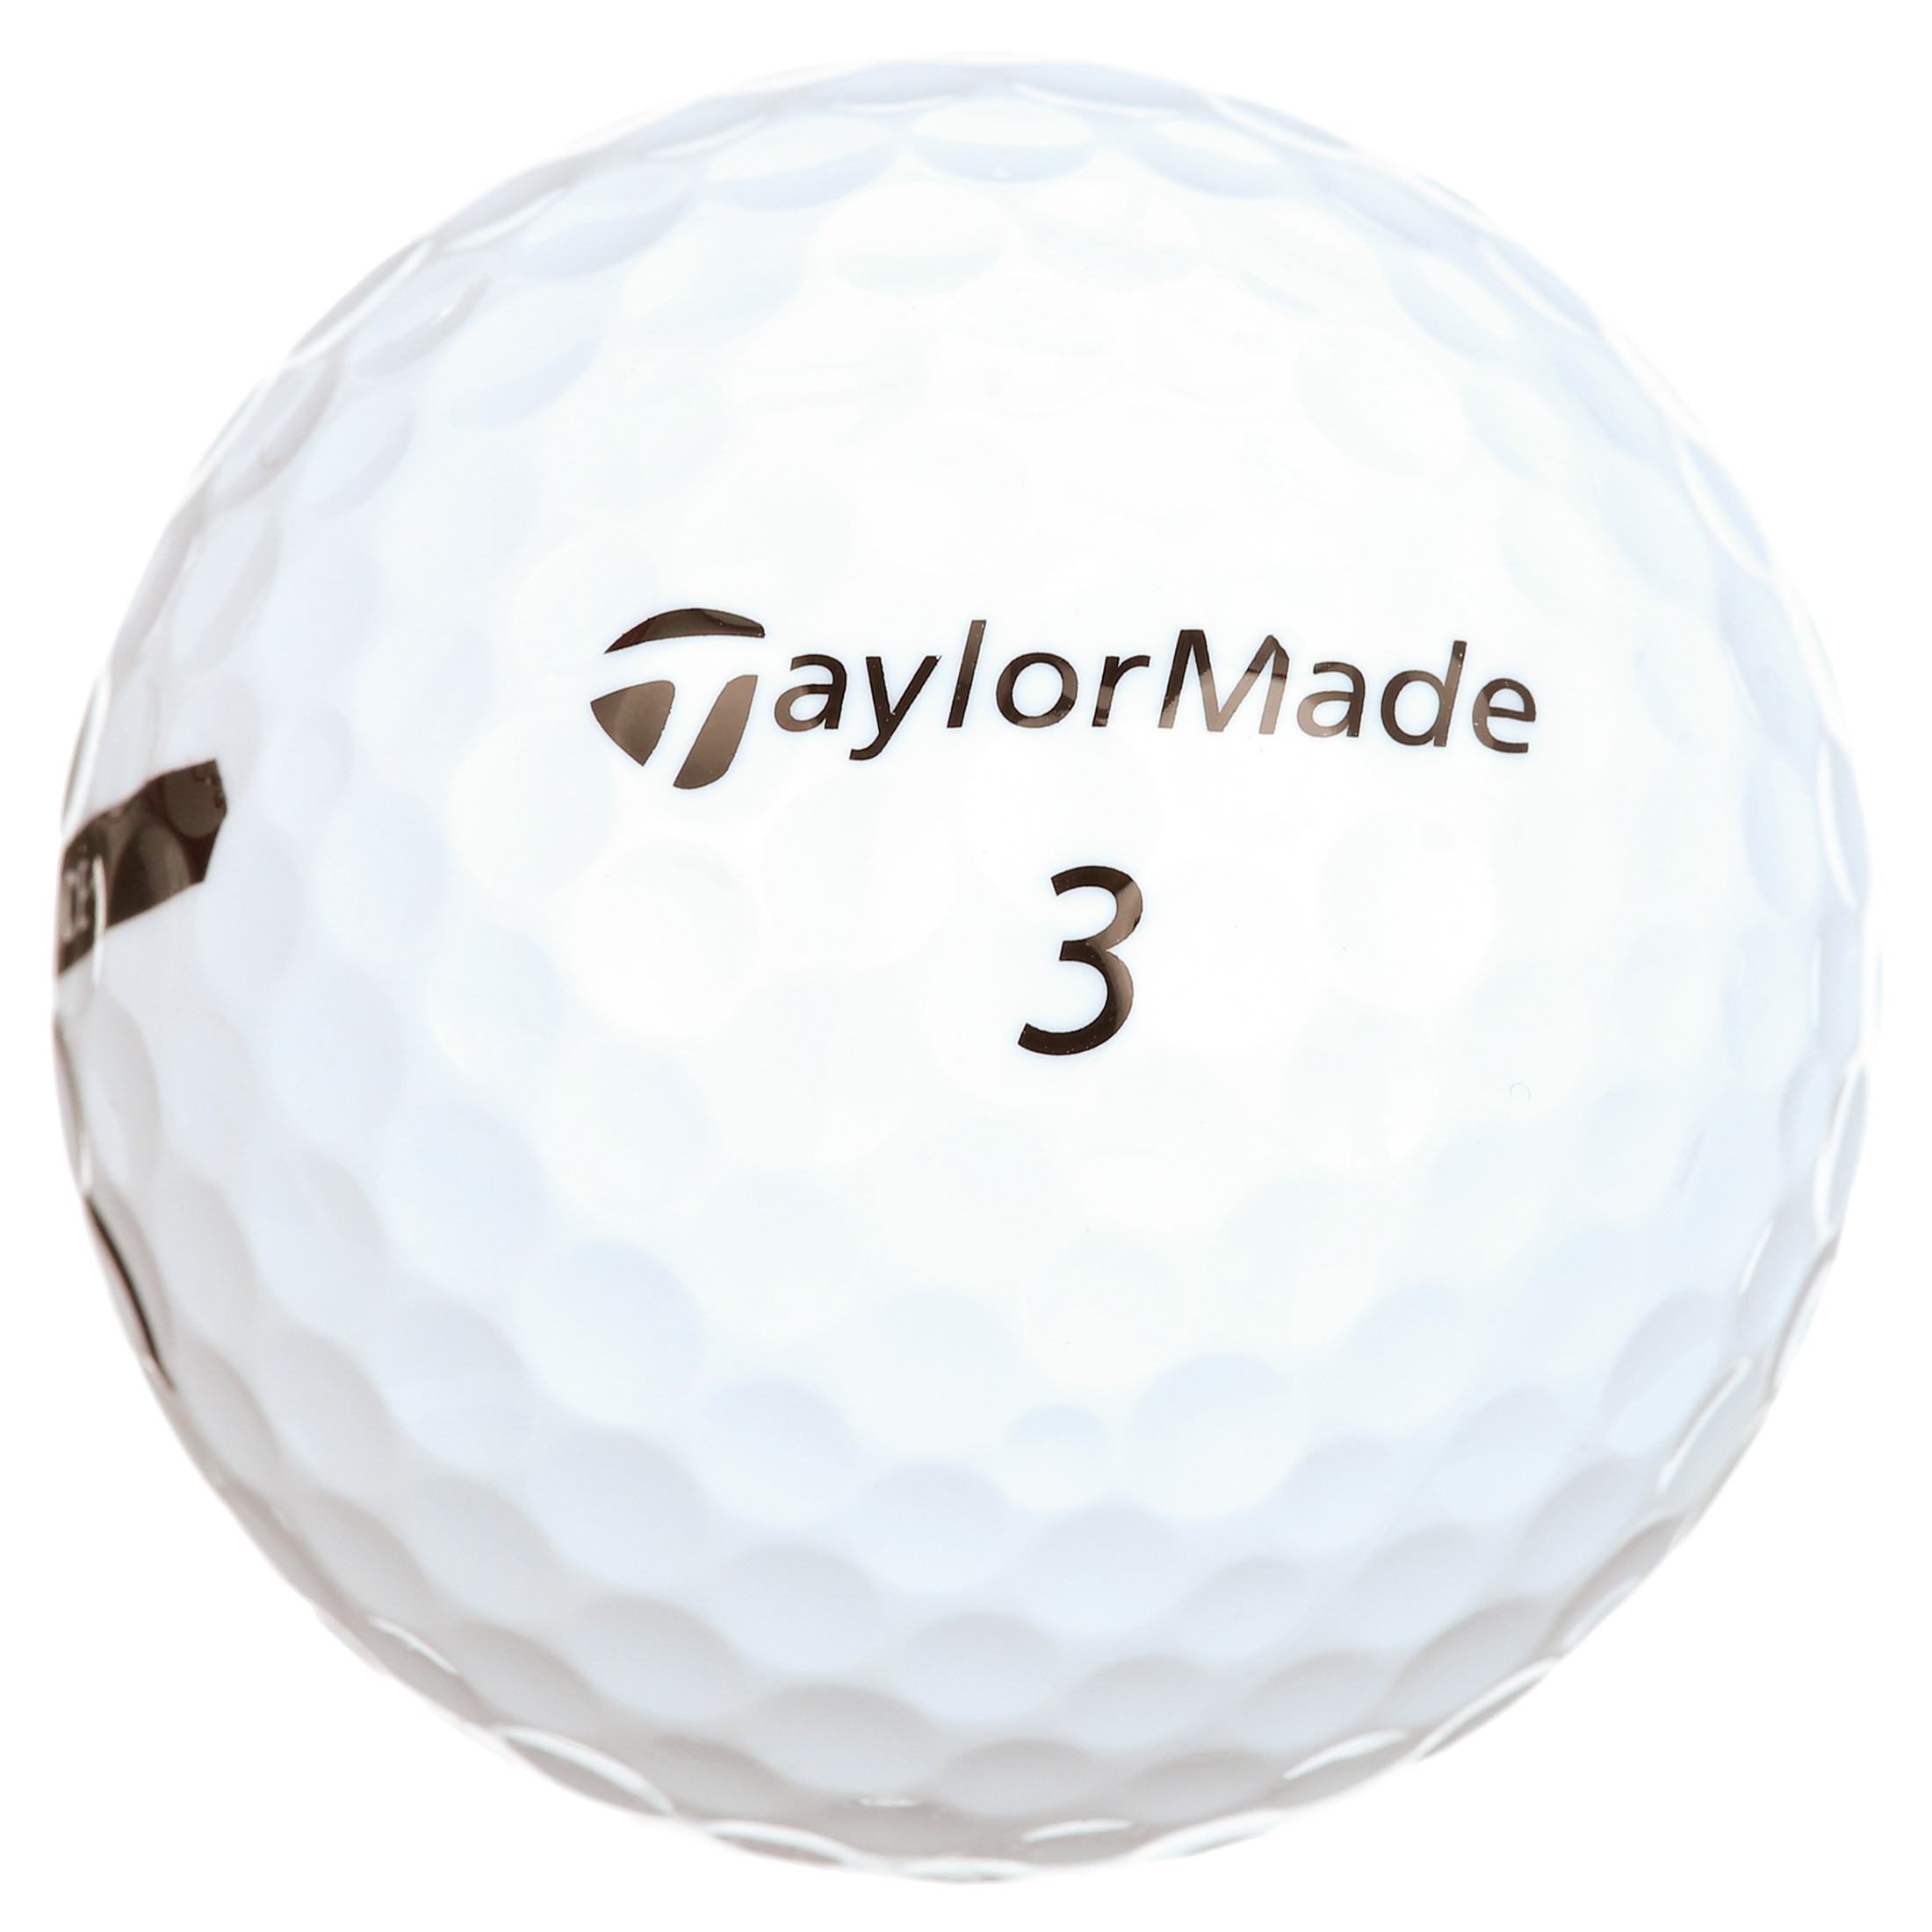 TaylorMade 2021 Distance Plus Golf Balls, 12 Pack, White - image 2 of 6